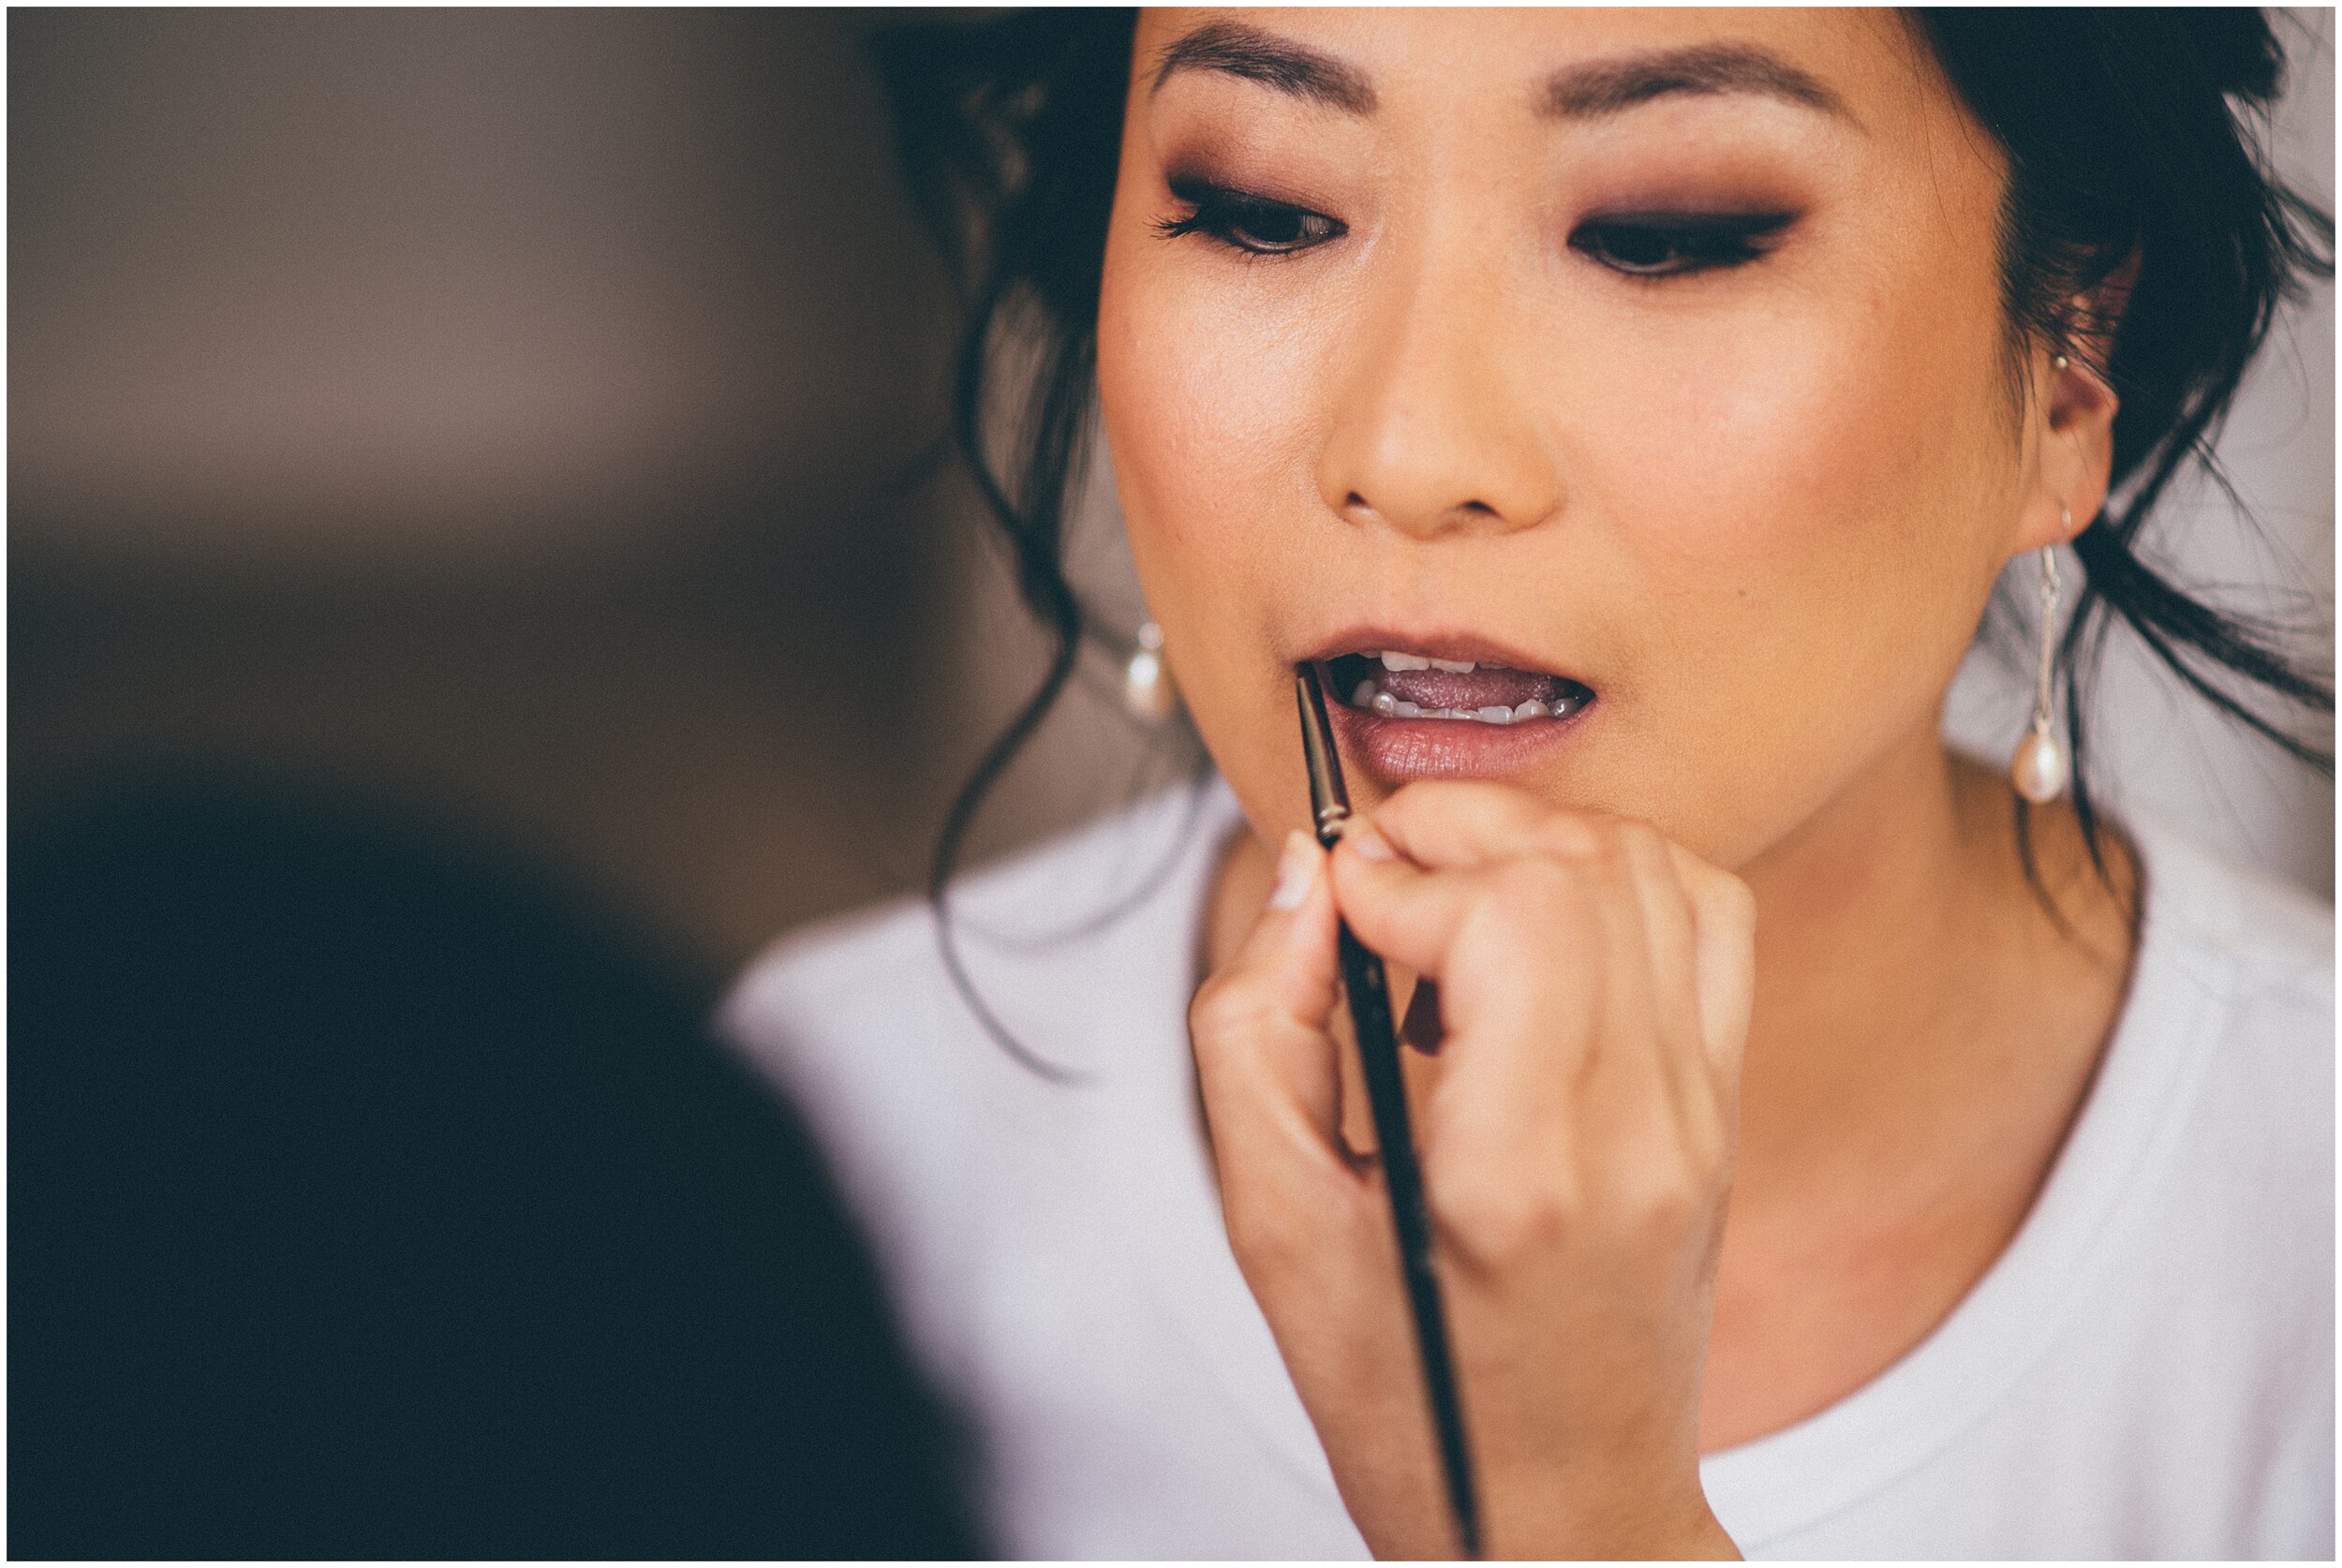 Beautiful bride gets her makeup professionally done.